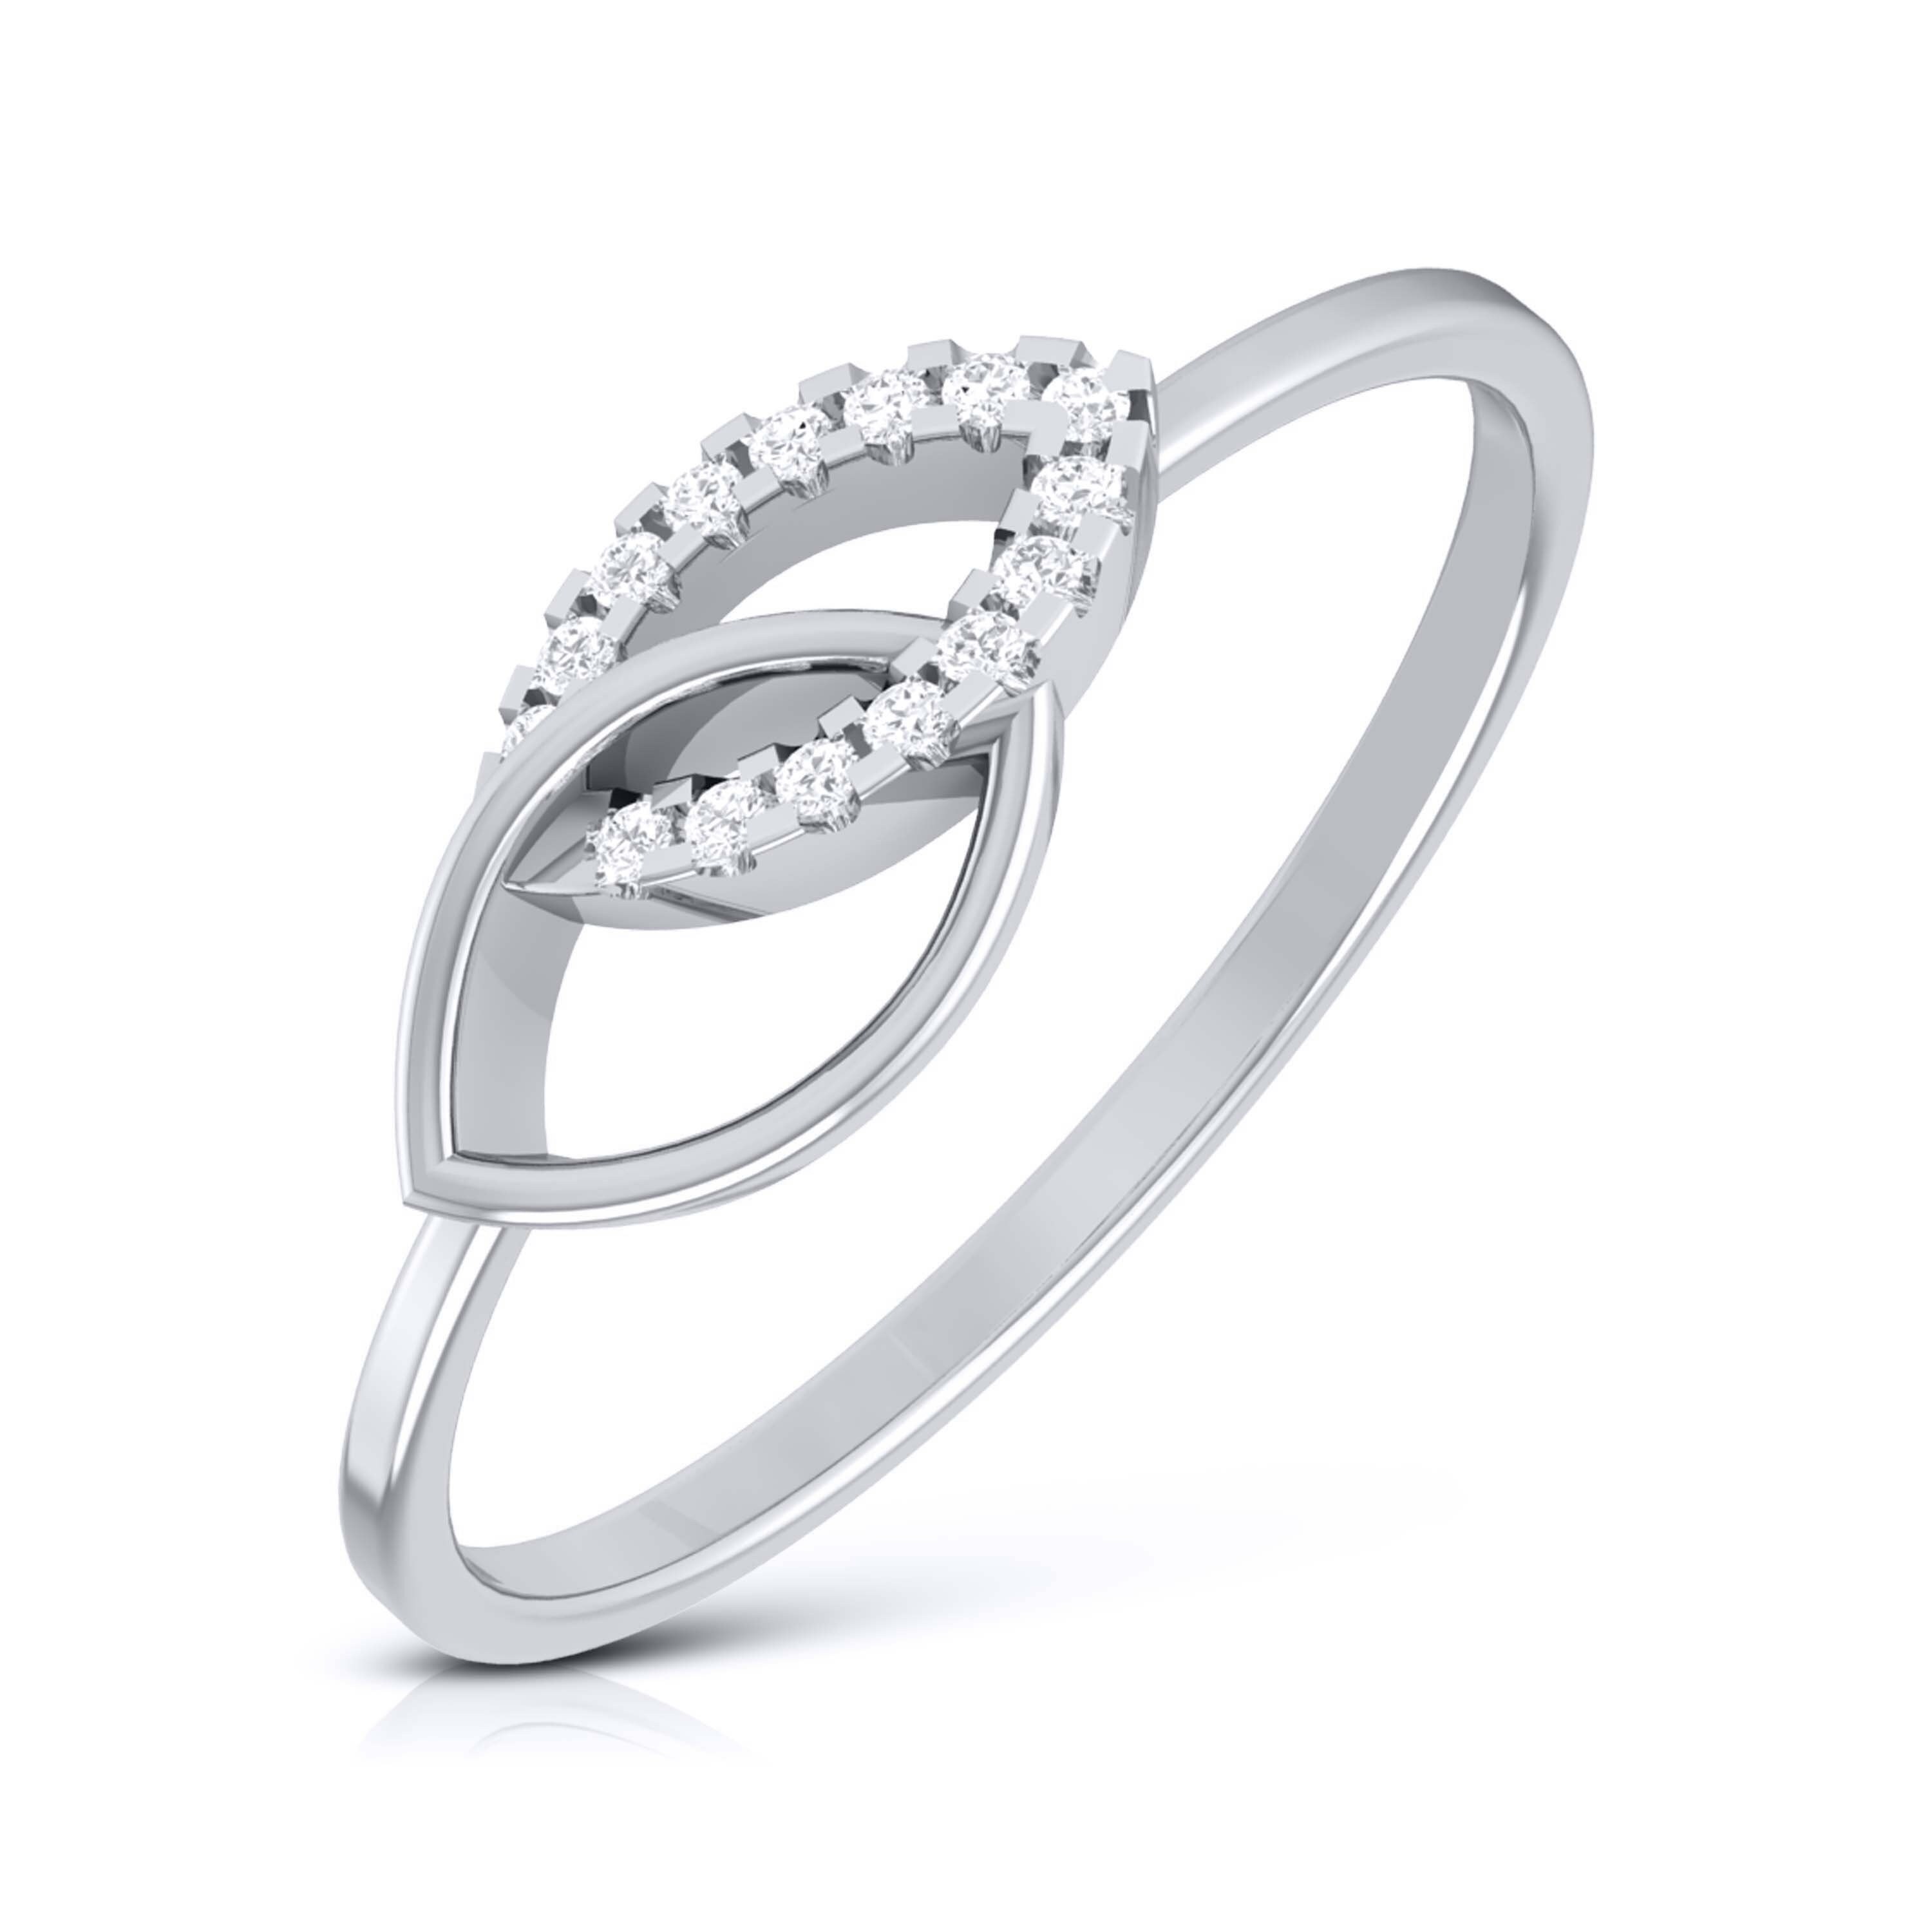 Platinum rings - Buy Platinum rings Online at Best Prices in India -  LimeRoad.com | page 190